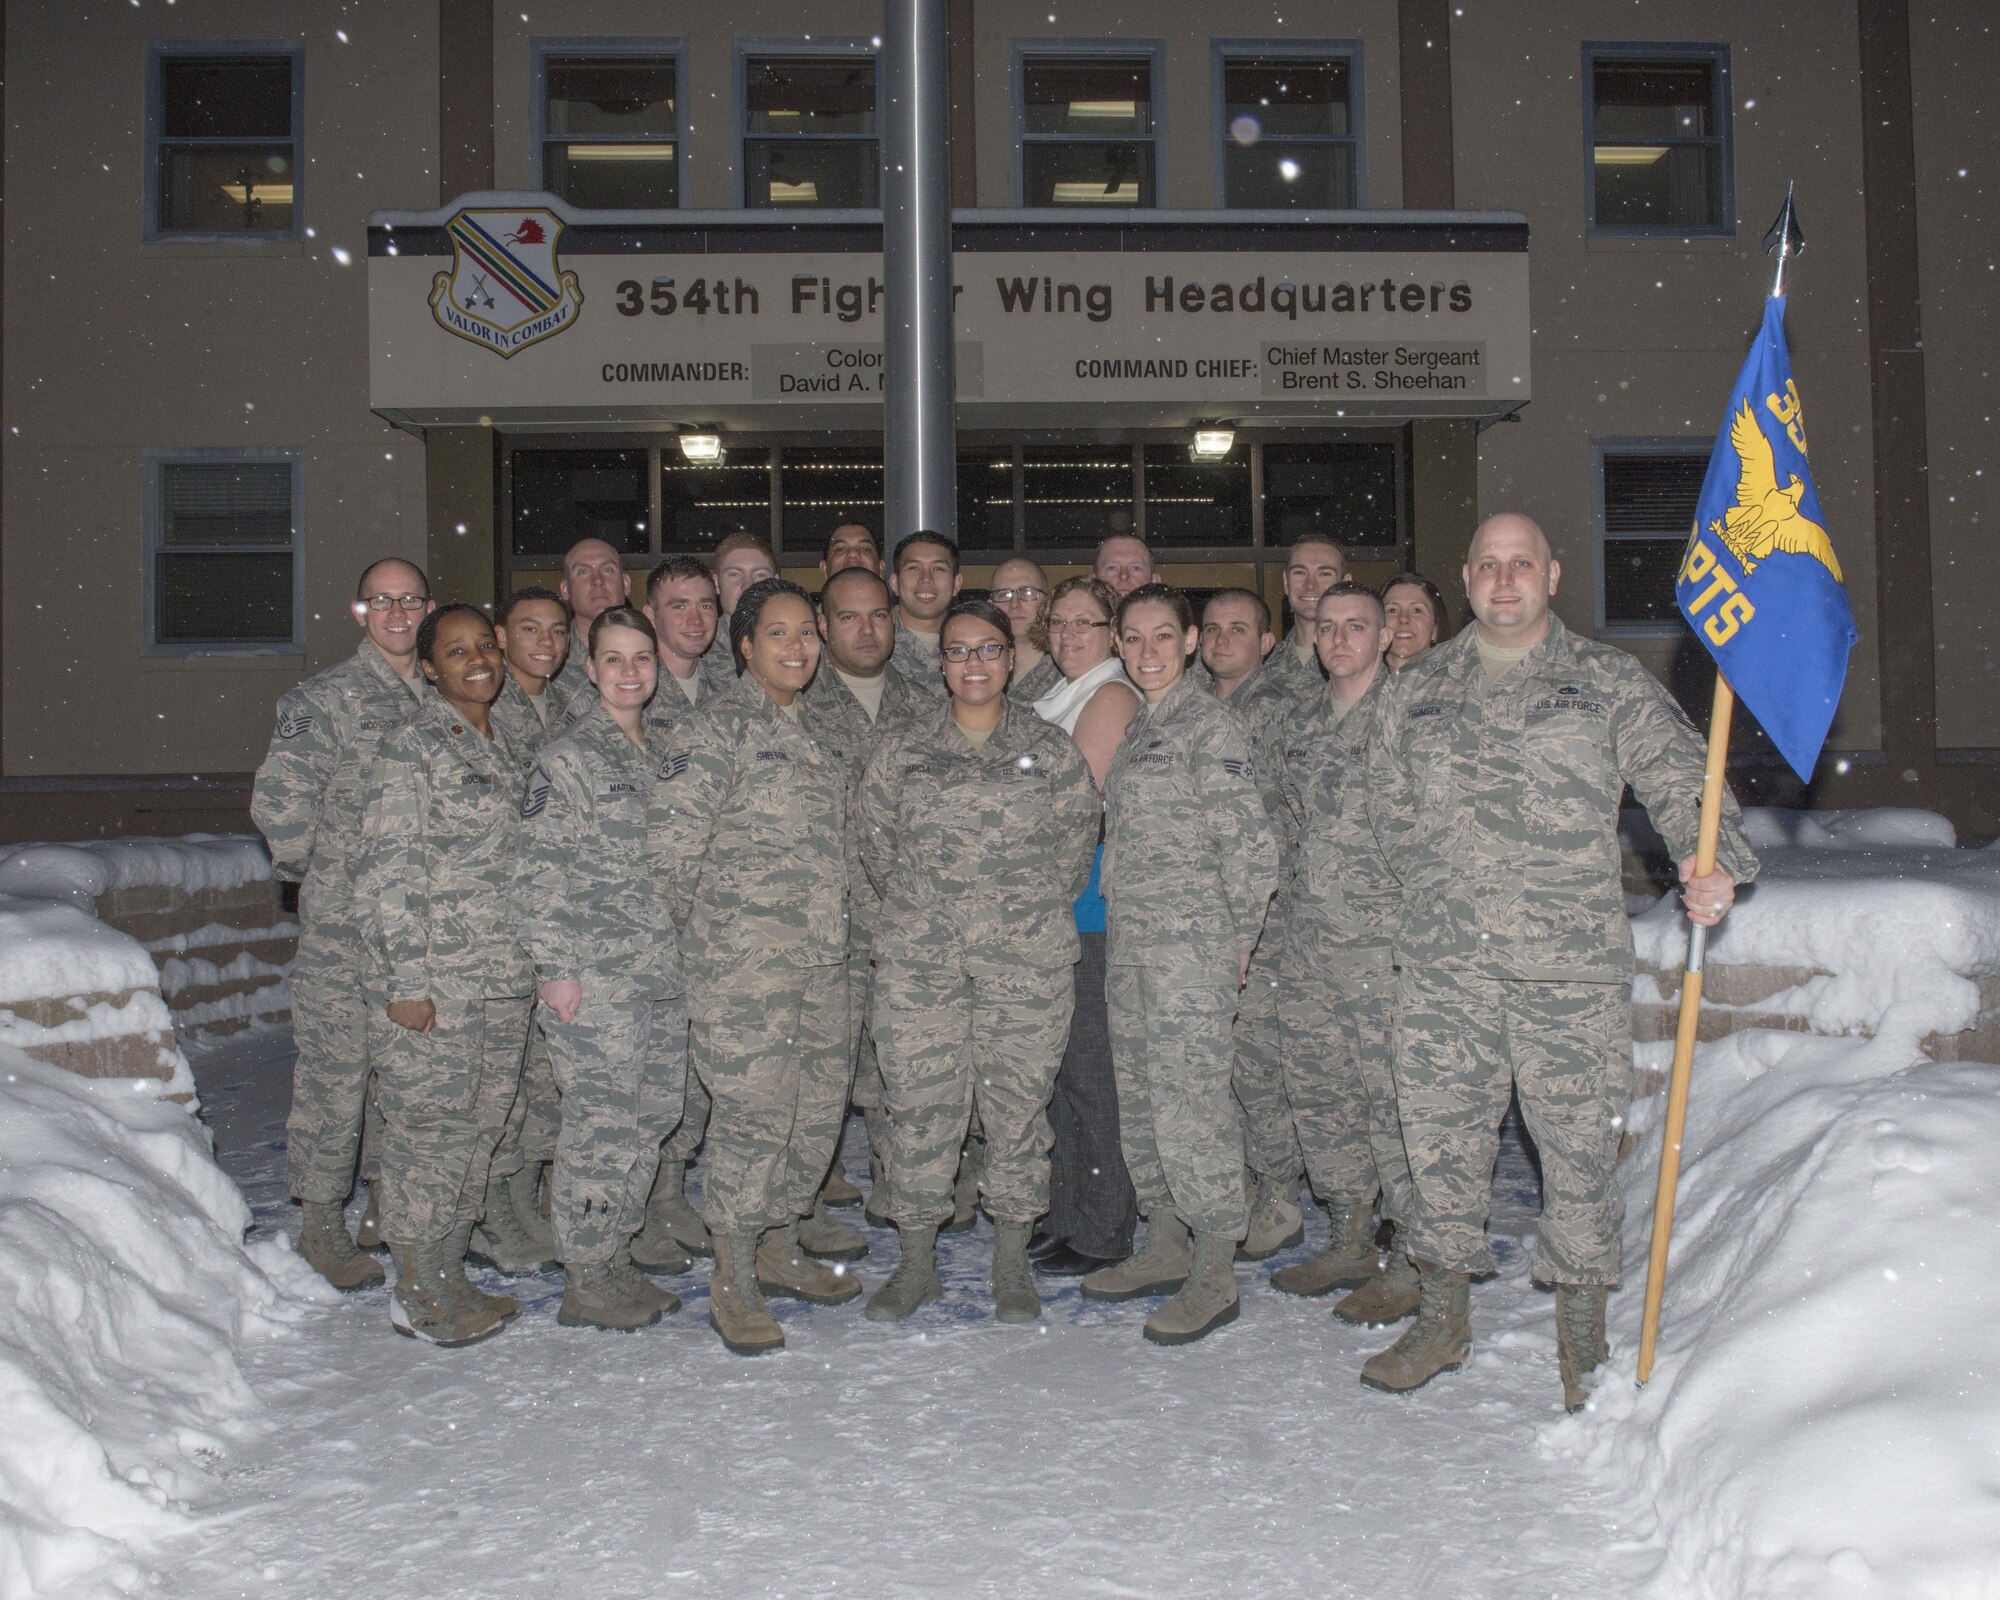 Members of the 354th Comptroller Squadron (CPTS) pose for a group photo, Dec. 21, 2016, at Eielson Air Force Base, Alaska. The 354th CPTS ensures travel vouchers are completed by hand,which reduced errors made by customers who used to complete their voucher on their own. (U.S. Air Force photo by Staff Sgt. Ashley Nicole Taylor)